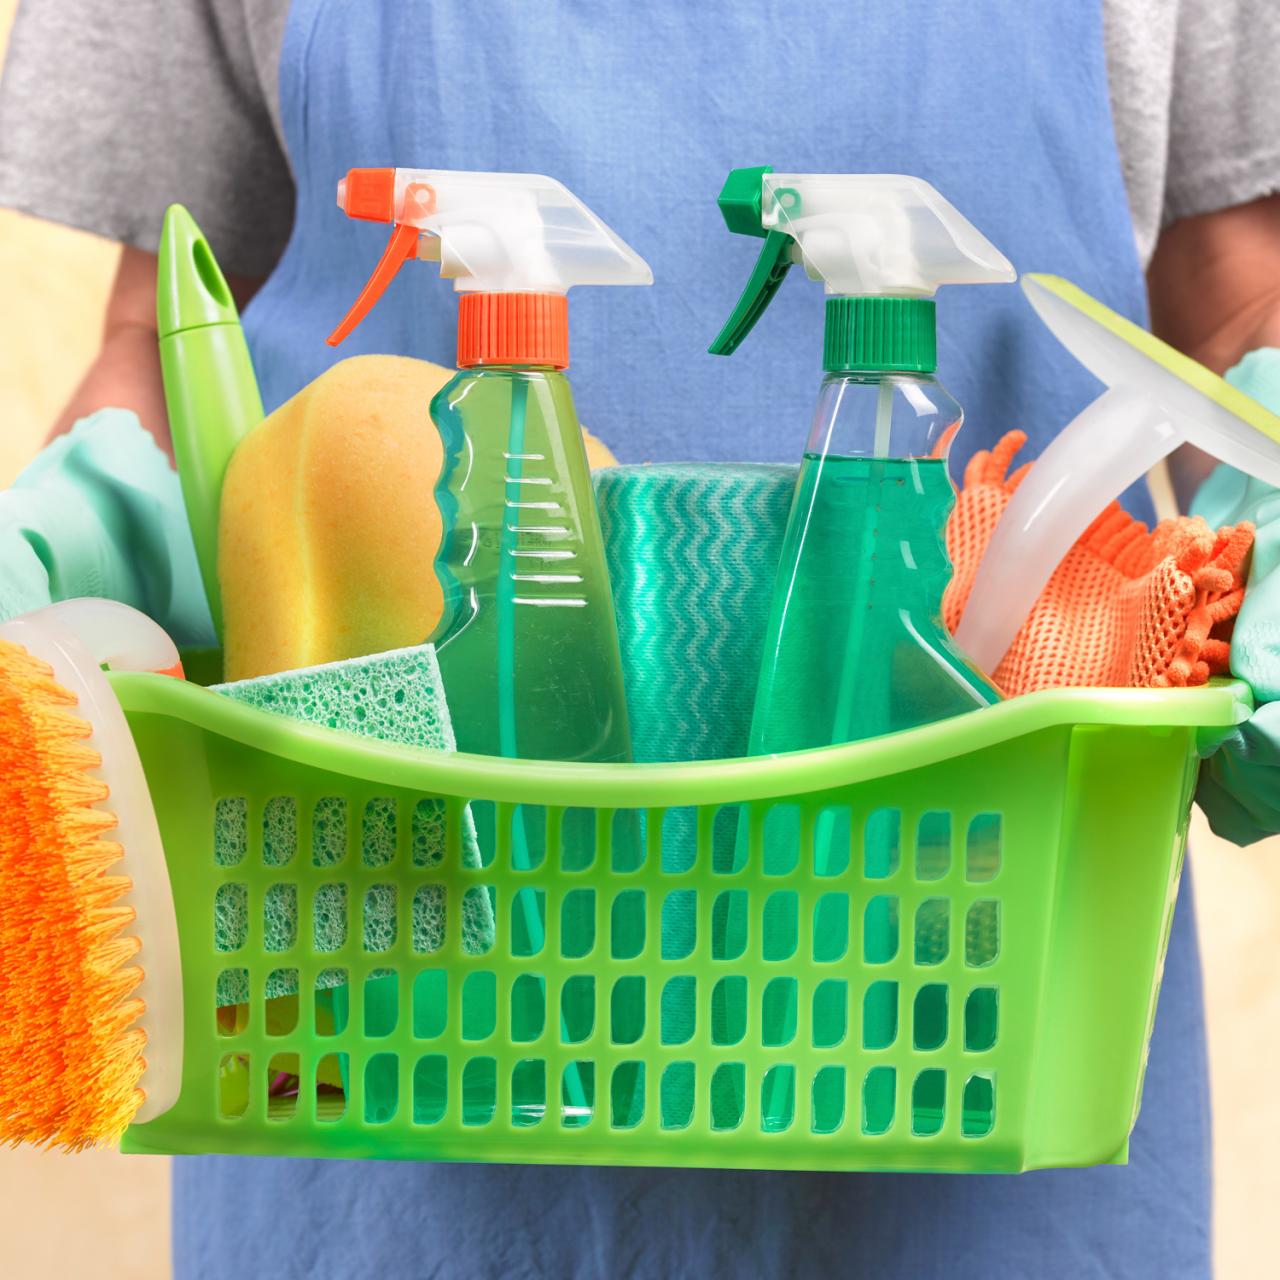 9 Best Natural Cleaning Products For A Nontoxic Home - The Good Trade